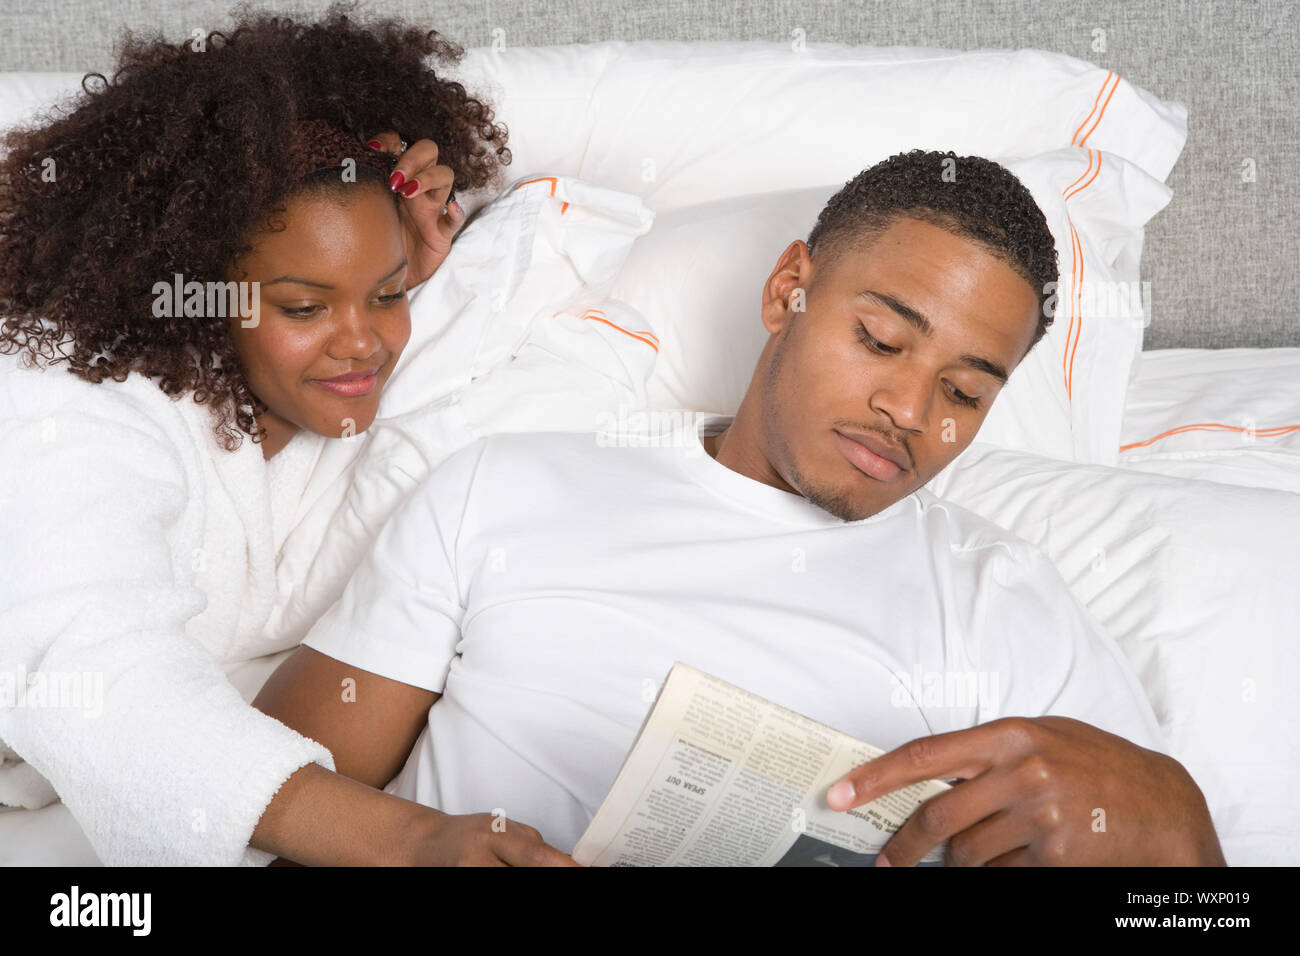 Couple Together in Bed Stock Photo